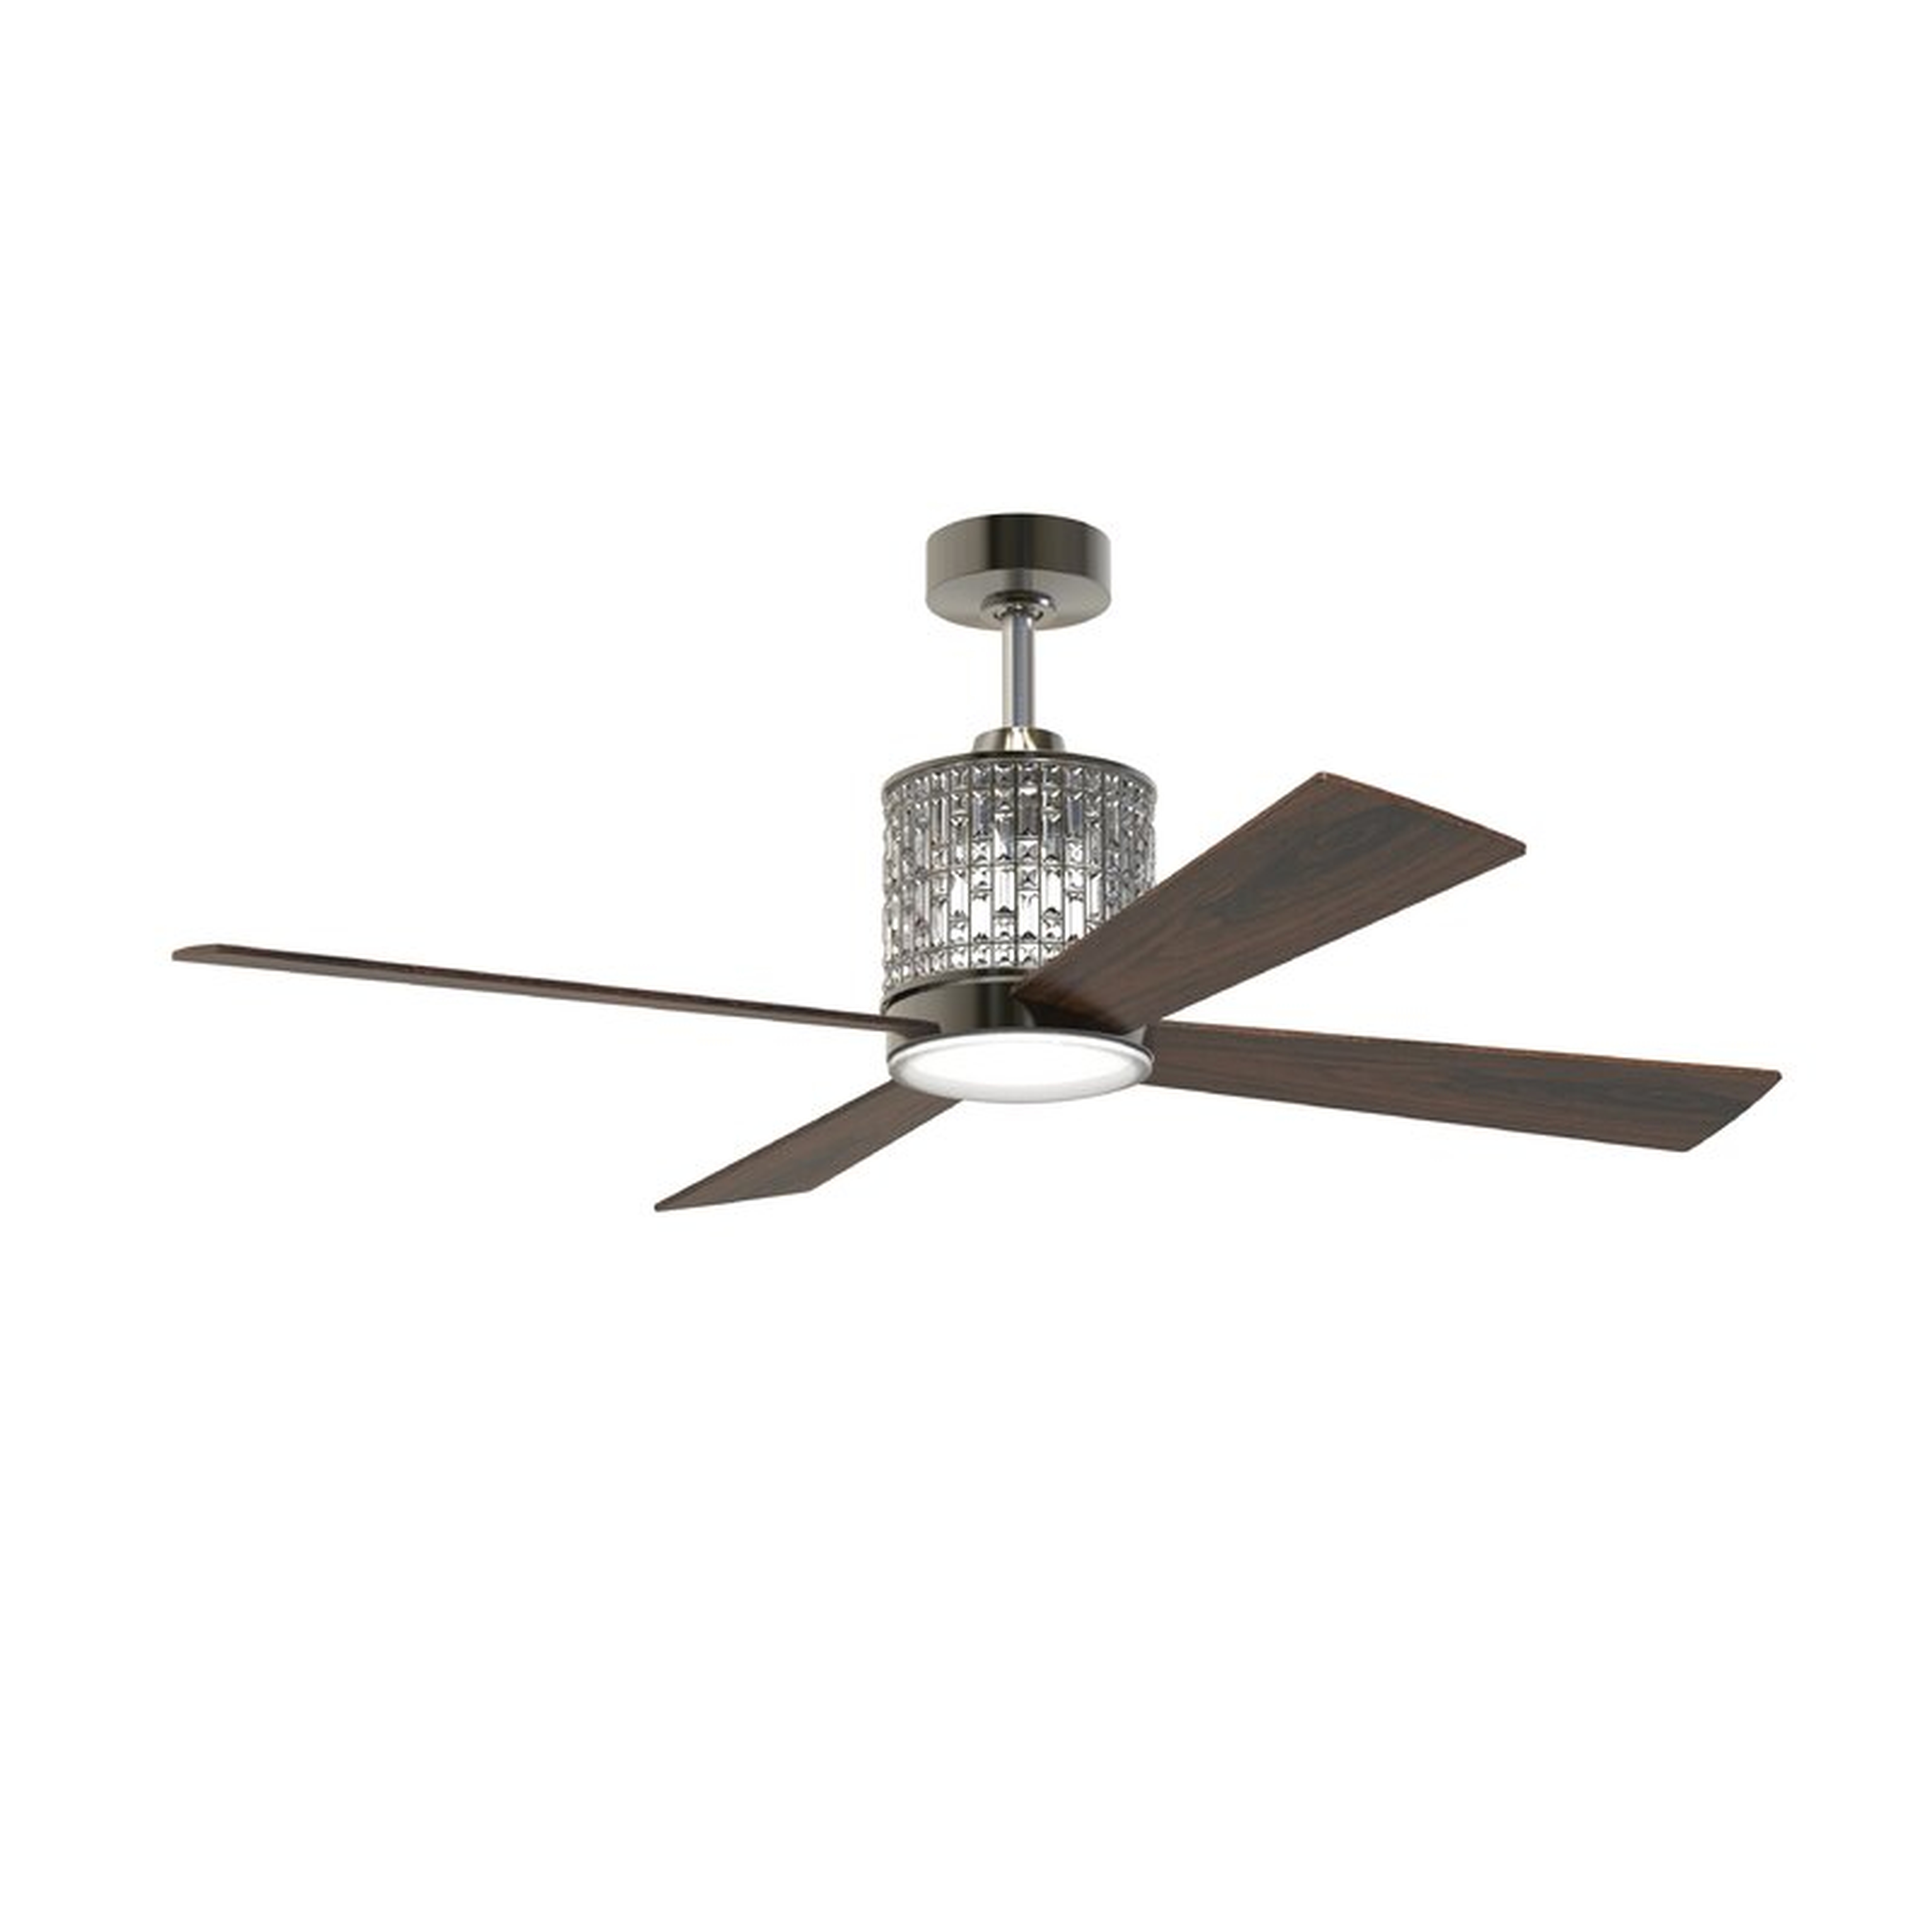 52" Bodella 4 Blade Ceiling Fan with Remote, Light Kit Included - Wayfair